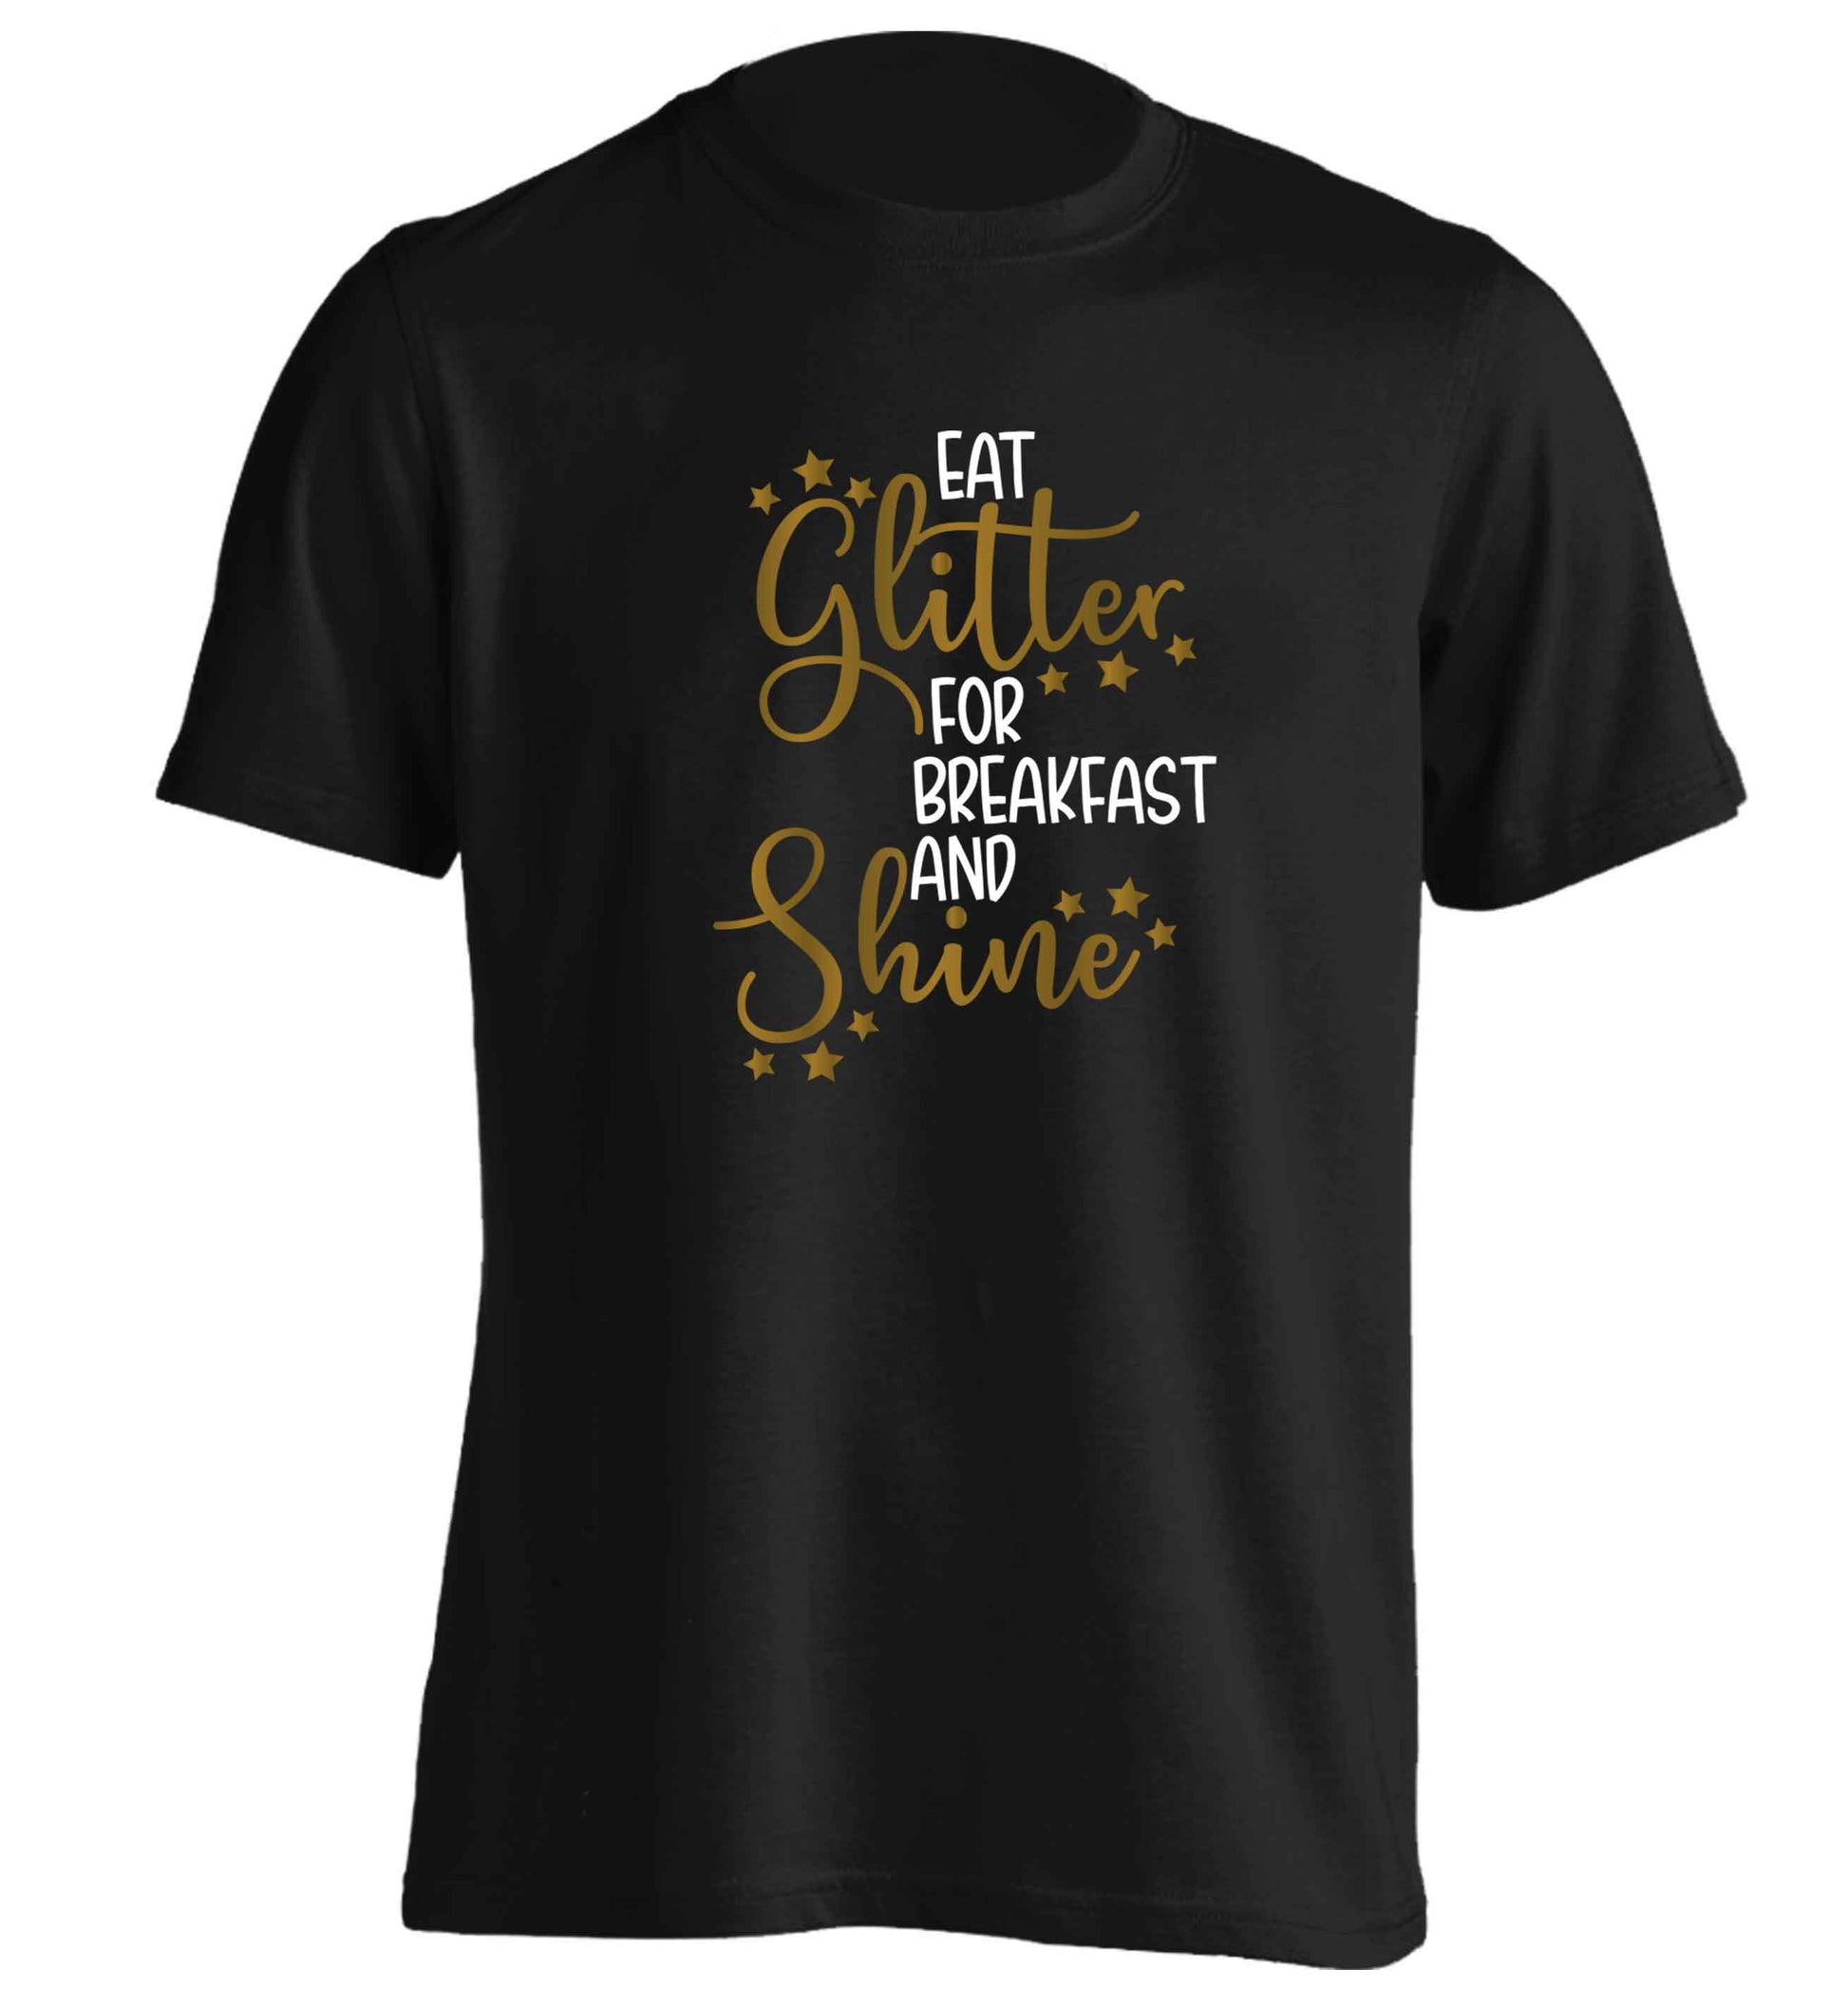 Eat glitter for breakfast and shine all day adults unisex black Tshirt 2XL